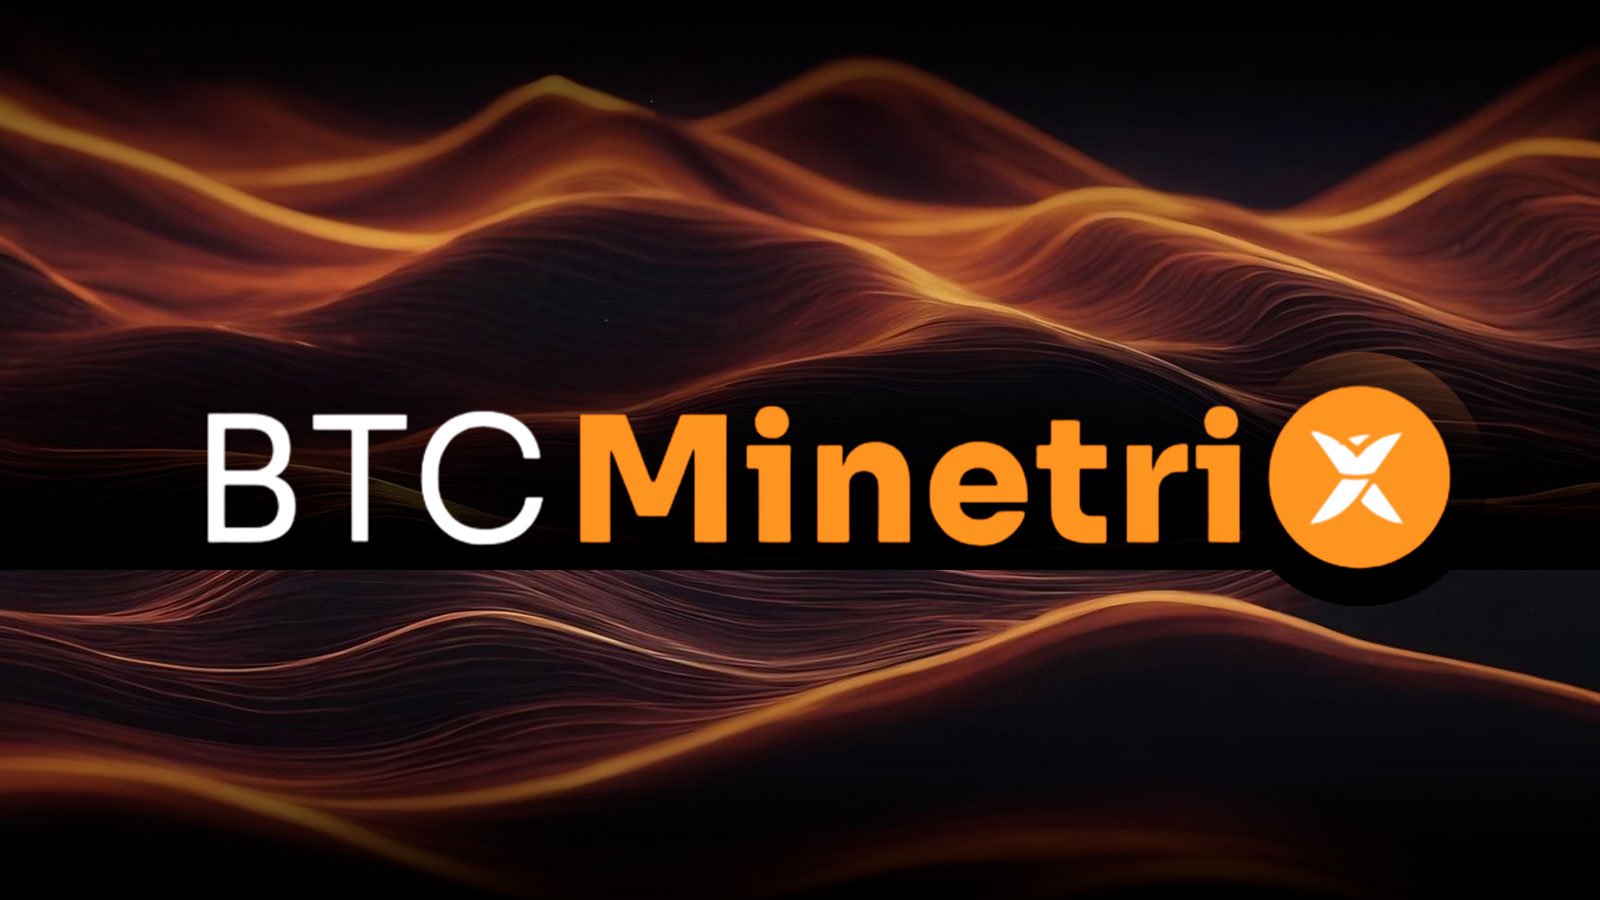 Bitcoin Minetrix Sets New Heights with Cloud Mining Innovation, ICO Surges  Past $10 Million | U.Today